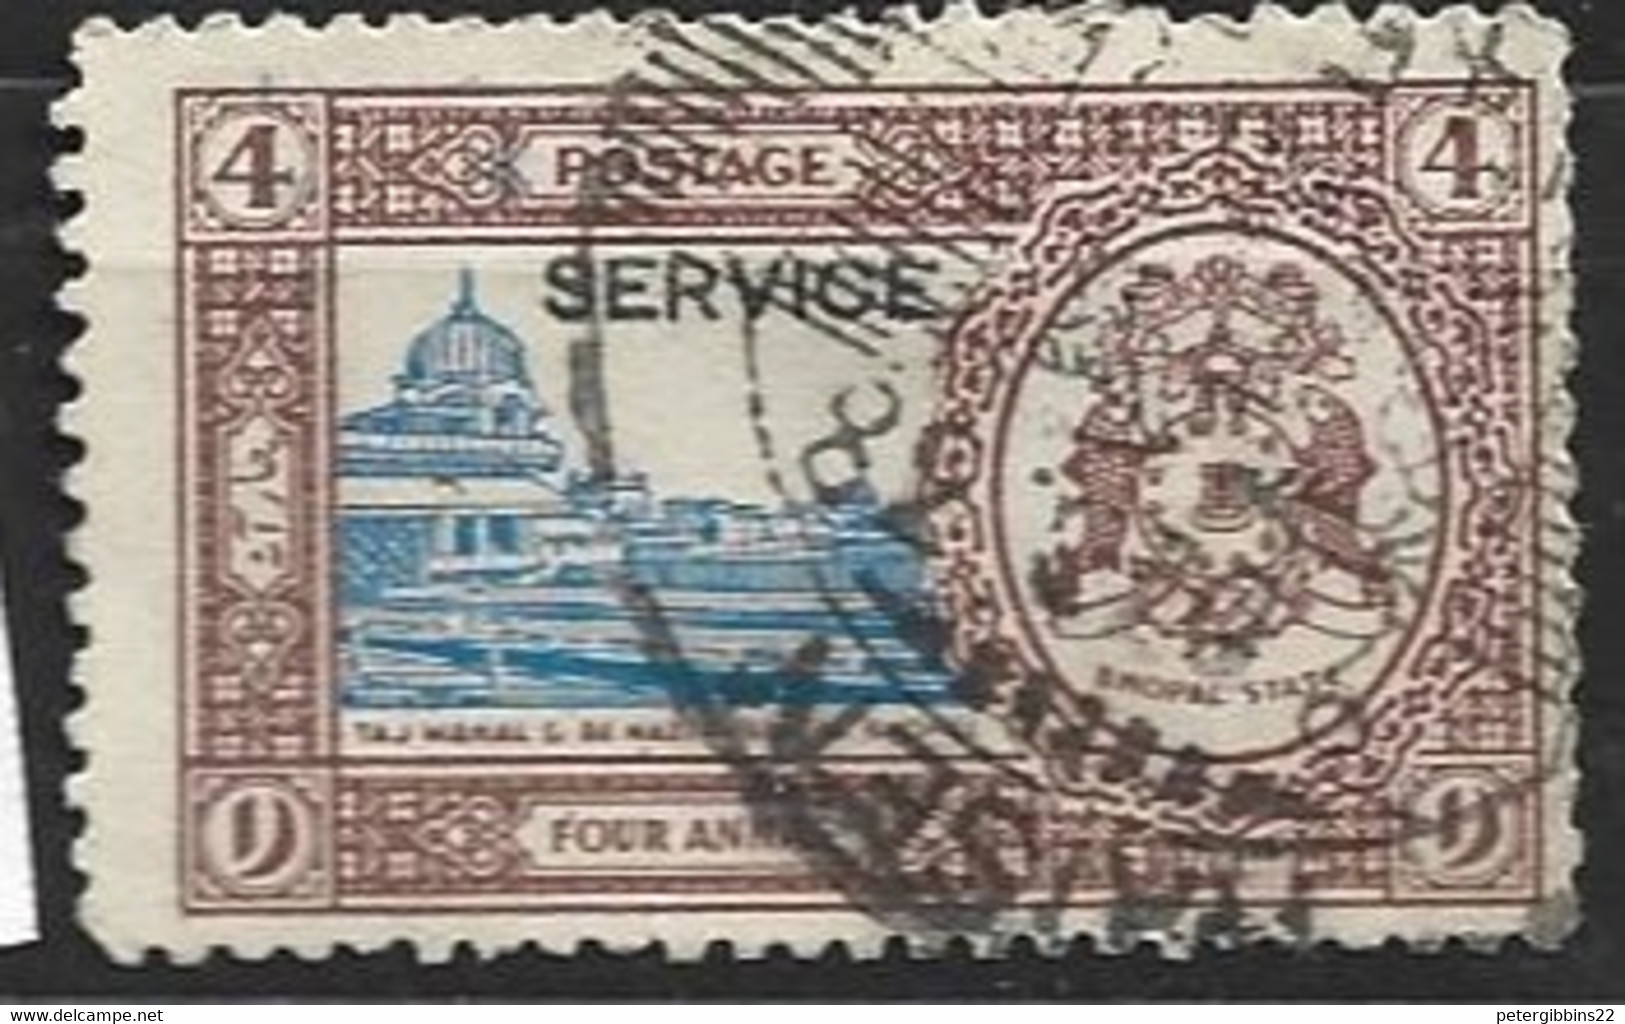 India  Bhopal  1936  SG  0339  4a  Services  Fine Used - Bhopal